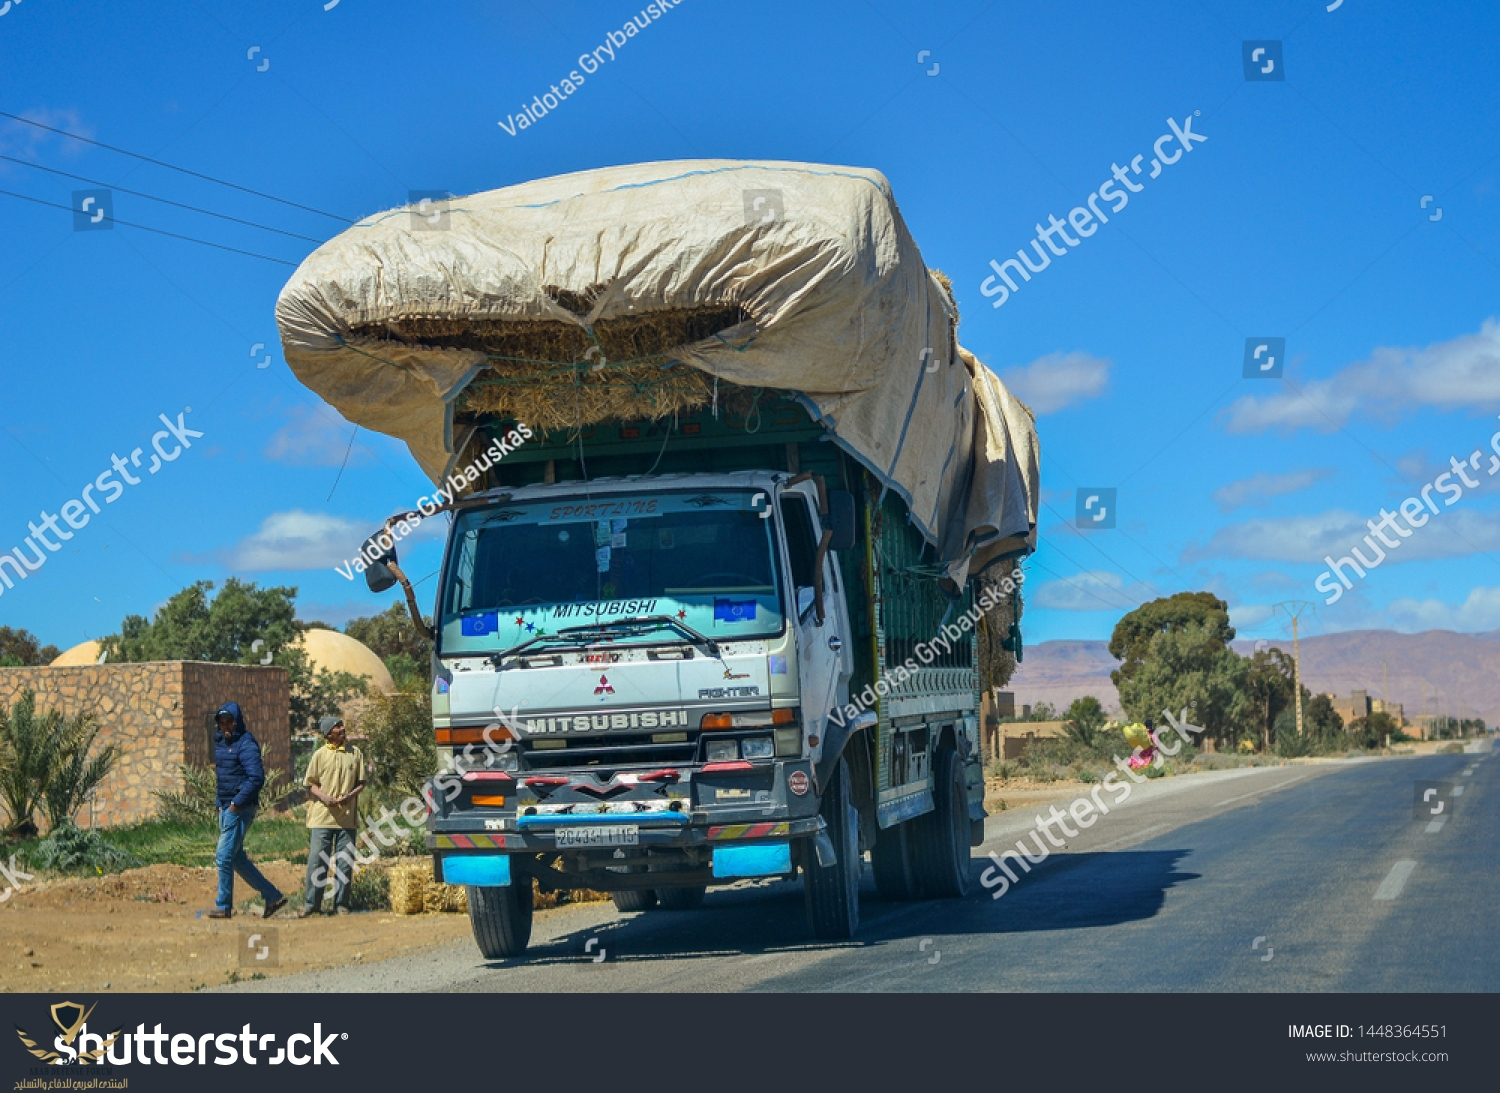 stock-photo-midelt-morocco-march-a-mitsubishi-fighter-truck-loaded-with-huge-cargo-standing-on...jpg